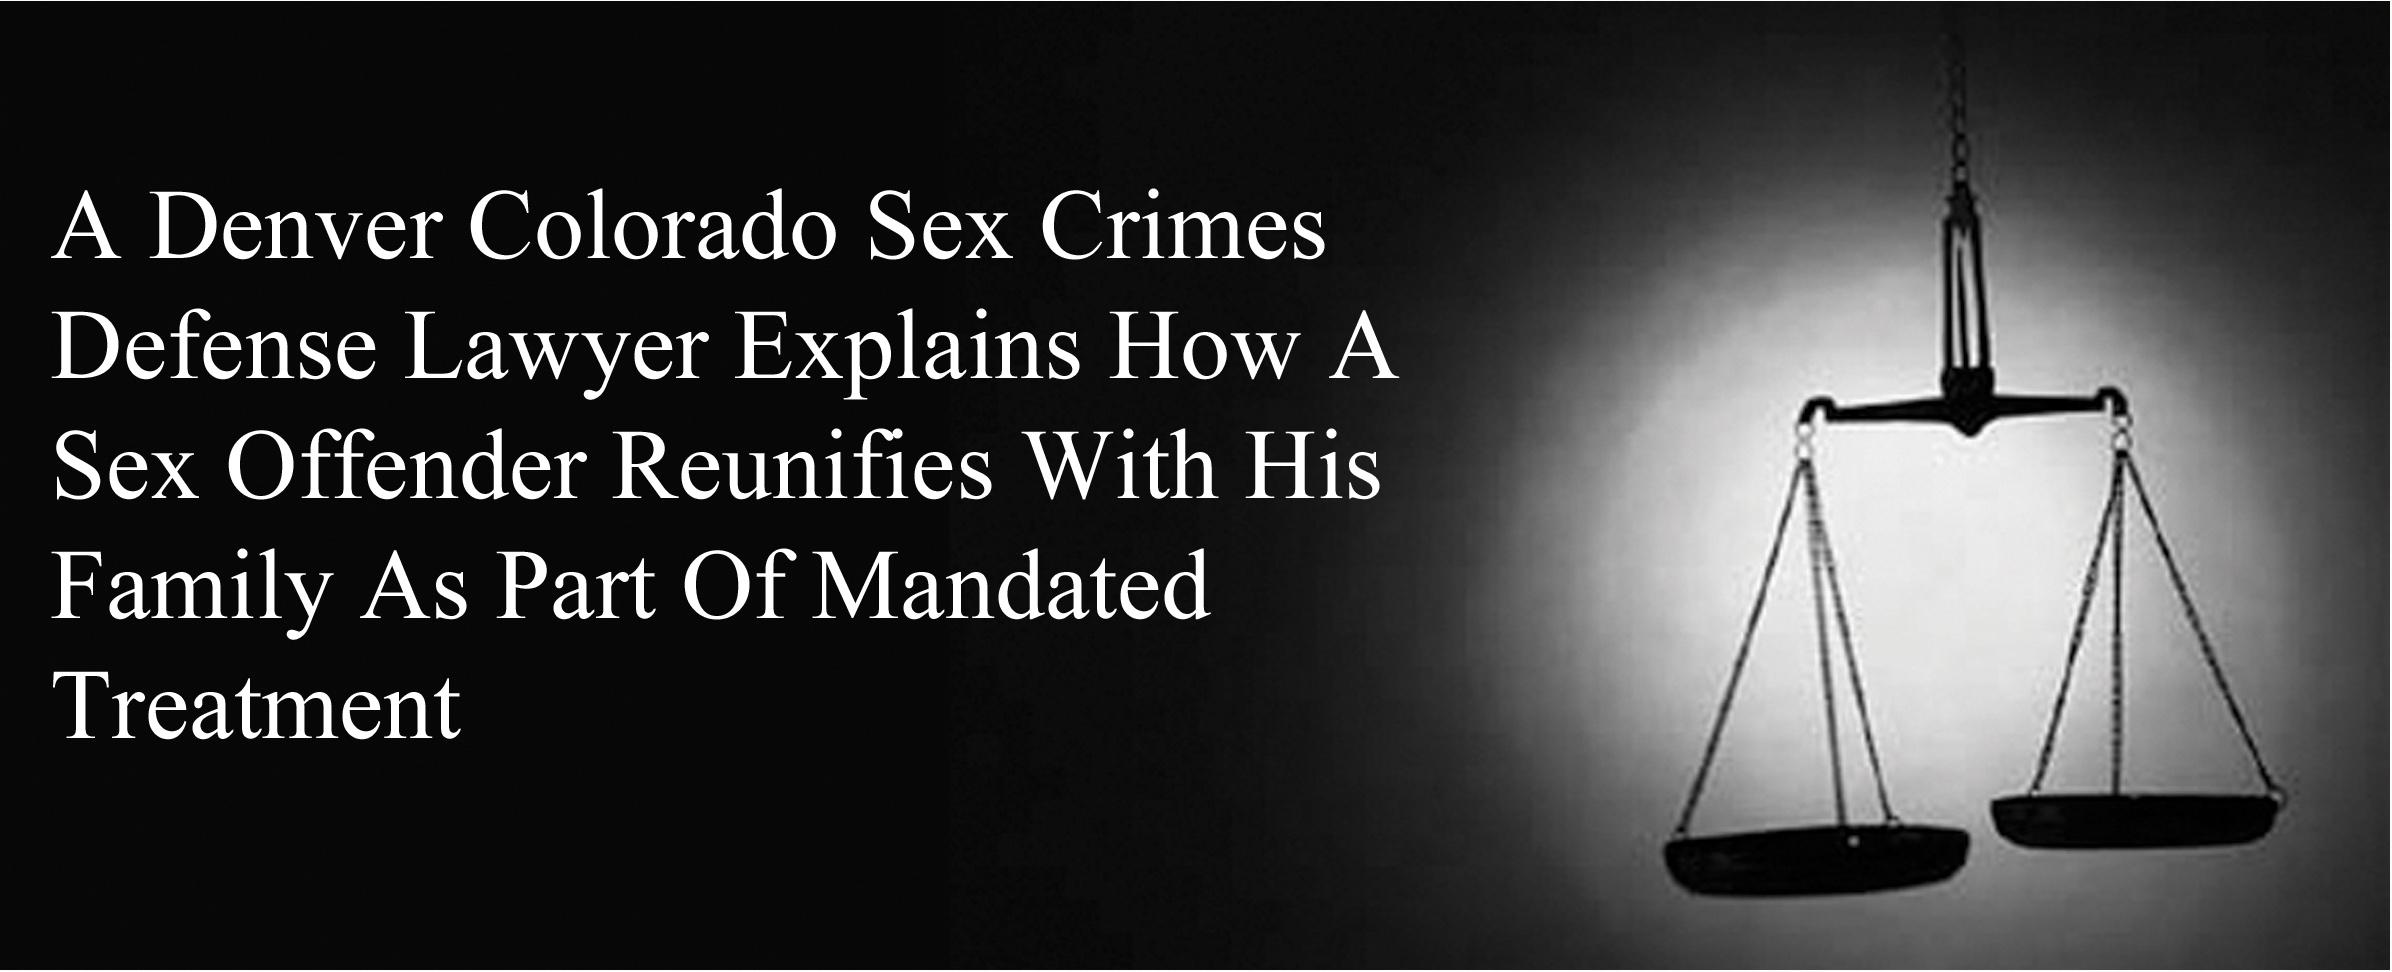 A Denver Colorado Sex Crimes Defense Lawyer Explains How A Sex Offender Reunifies With His Family As Part Of Mandated Treatment Colorado Sex Crimes Lawyer image